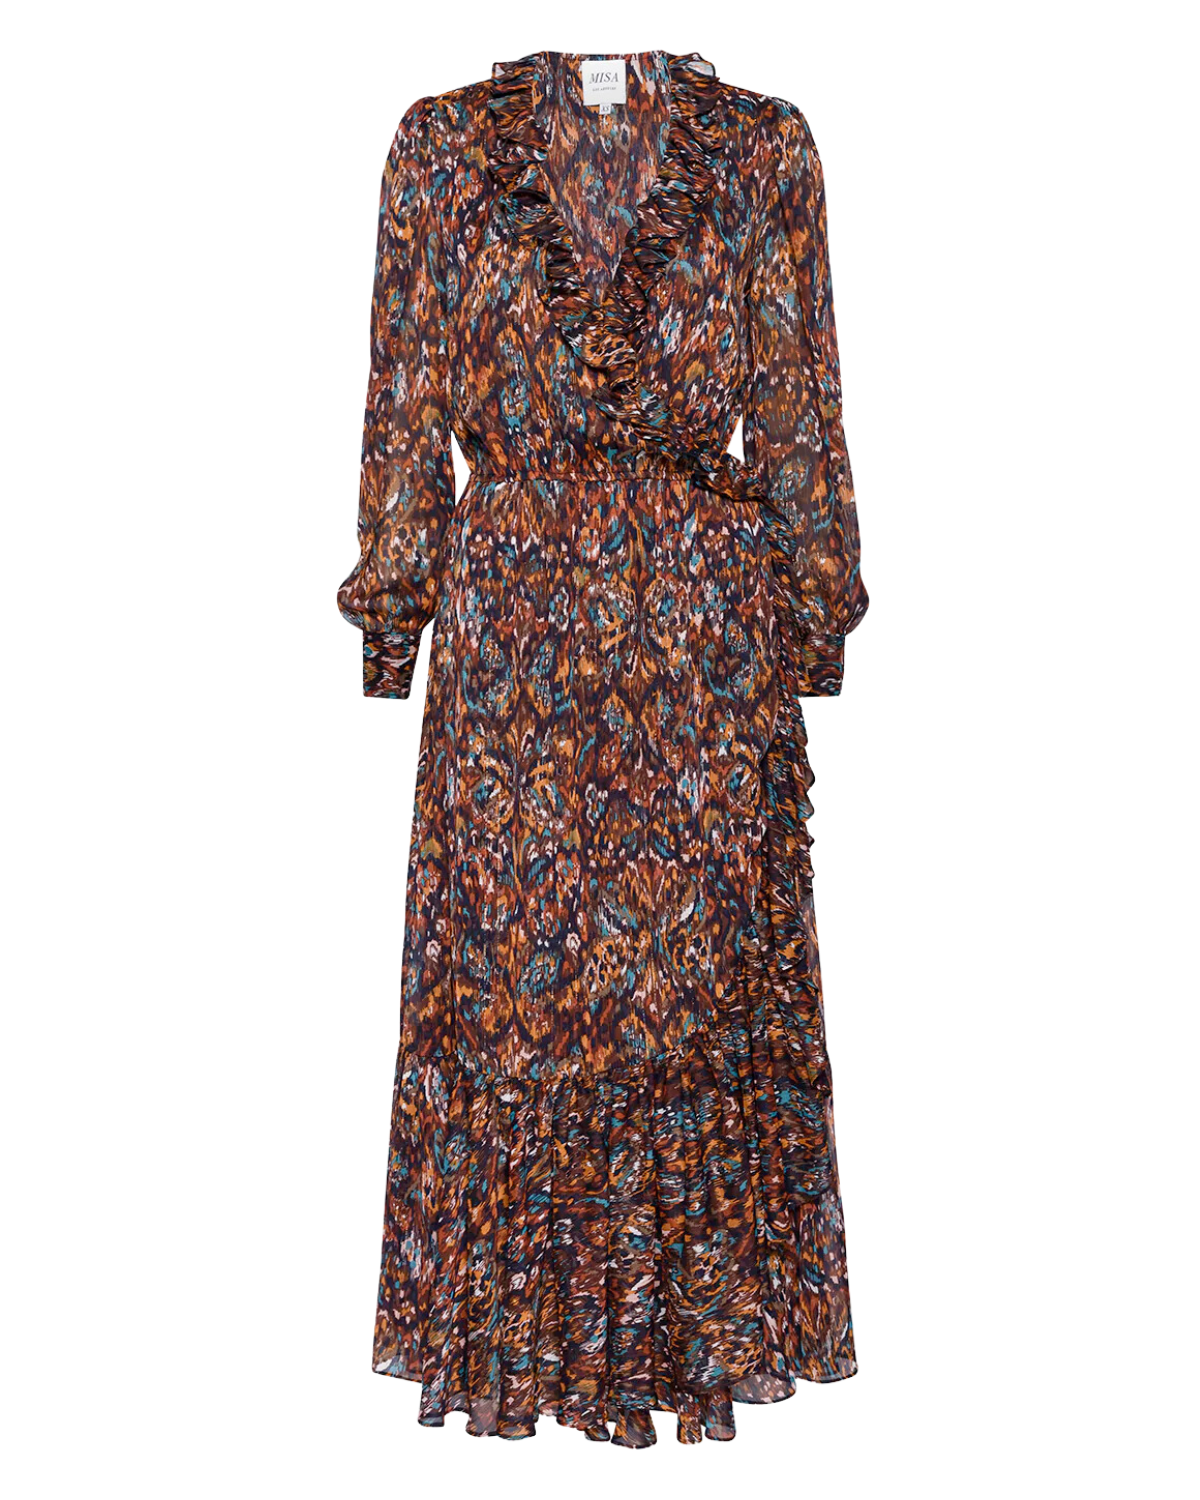 Charlotte Dress (Peacock Abstract)